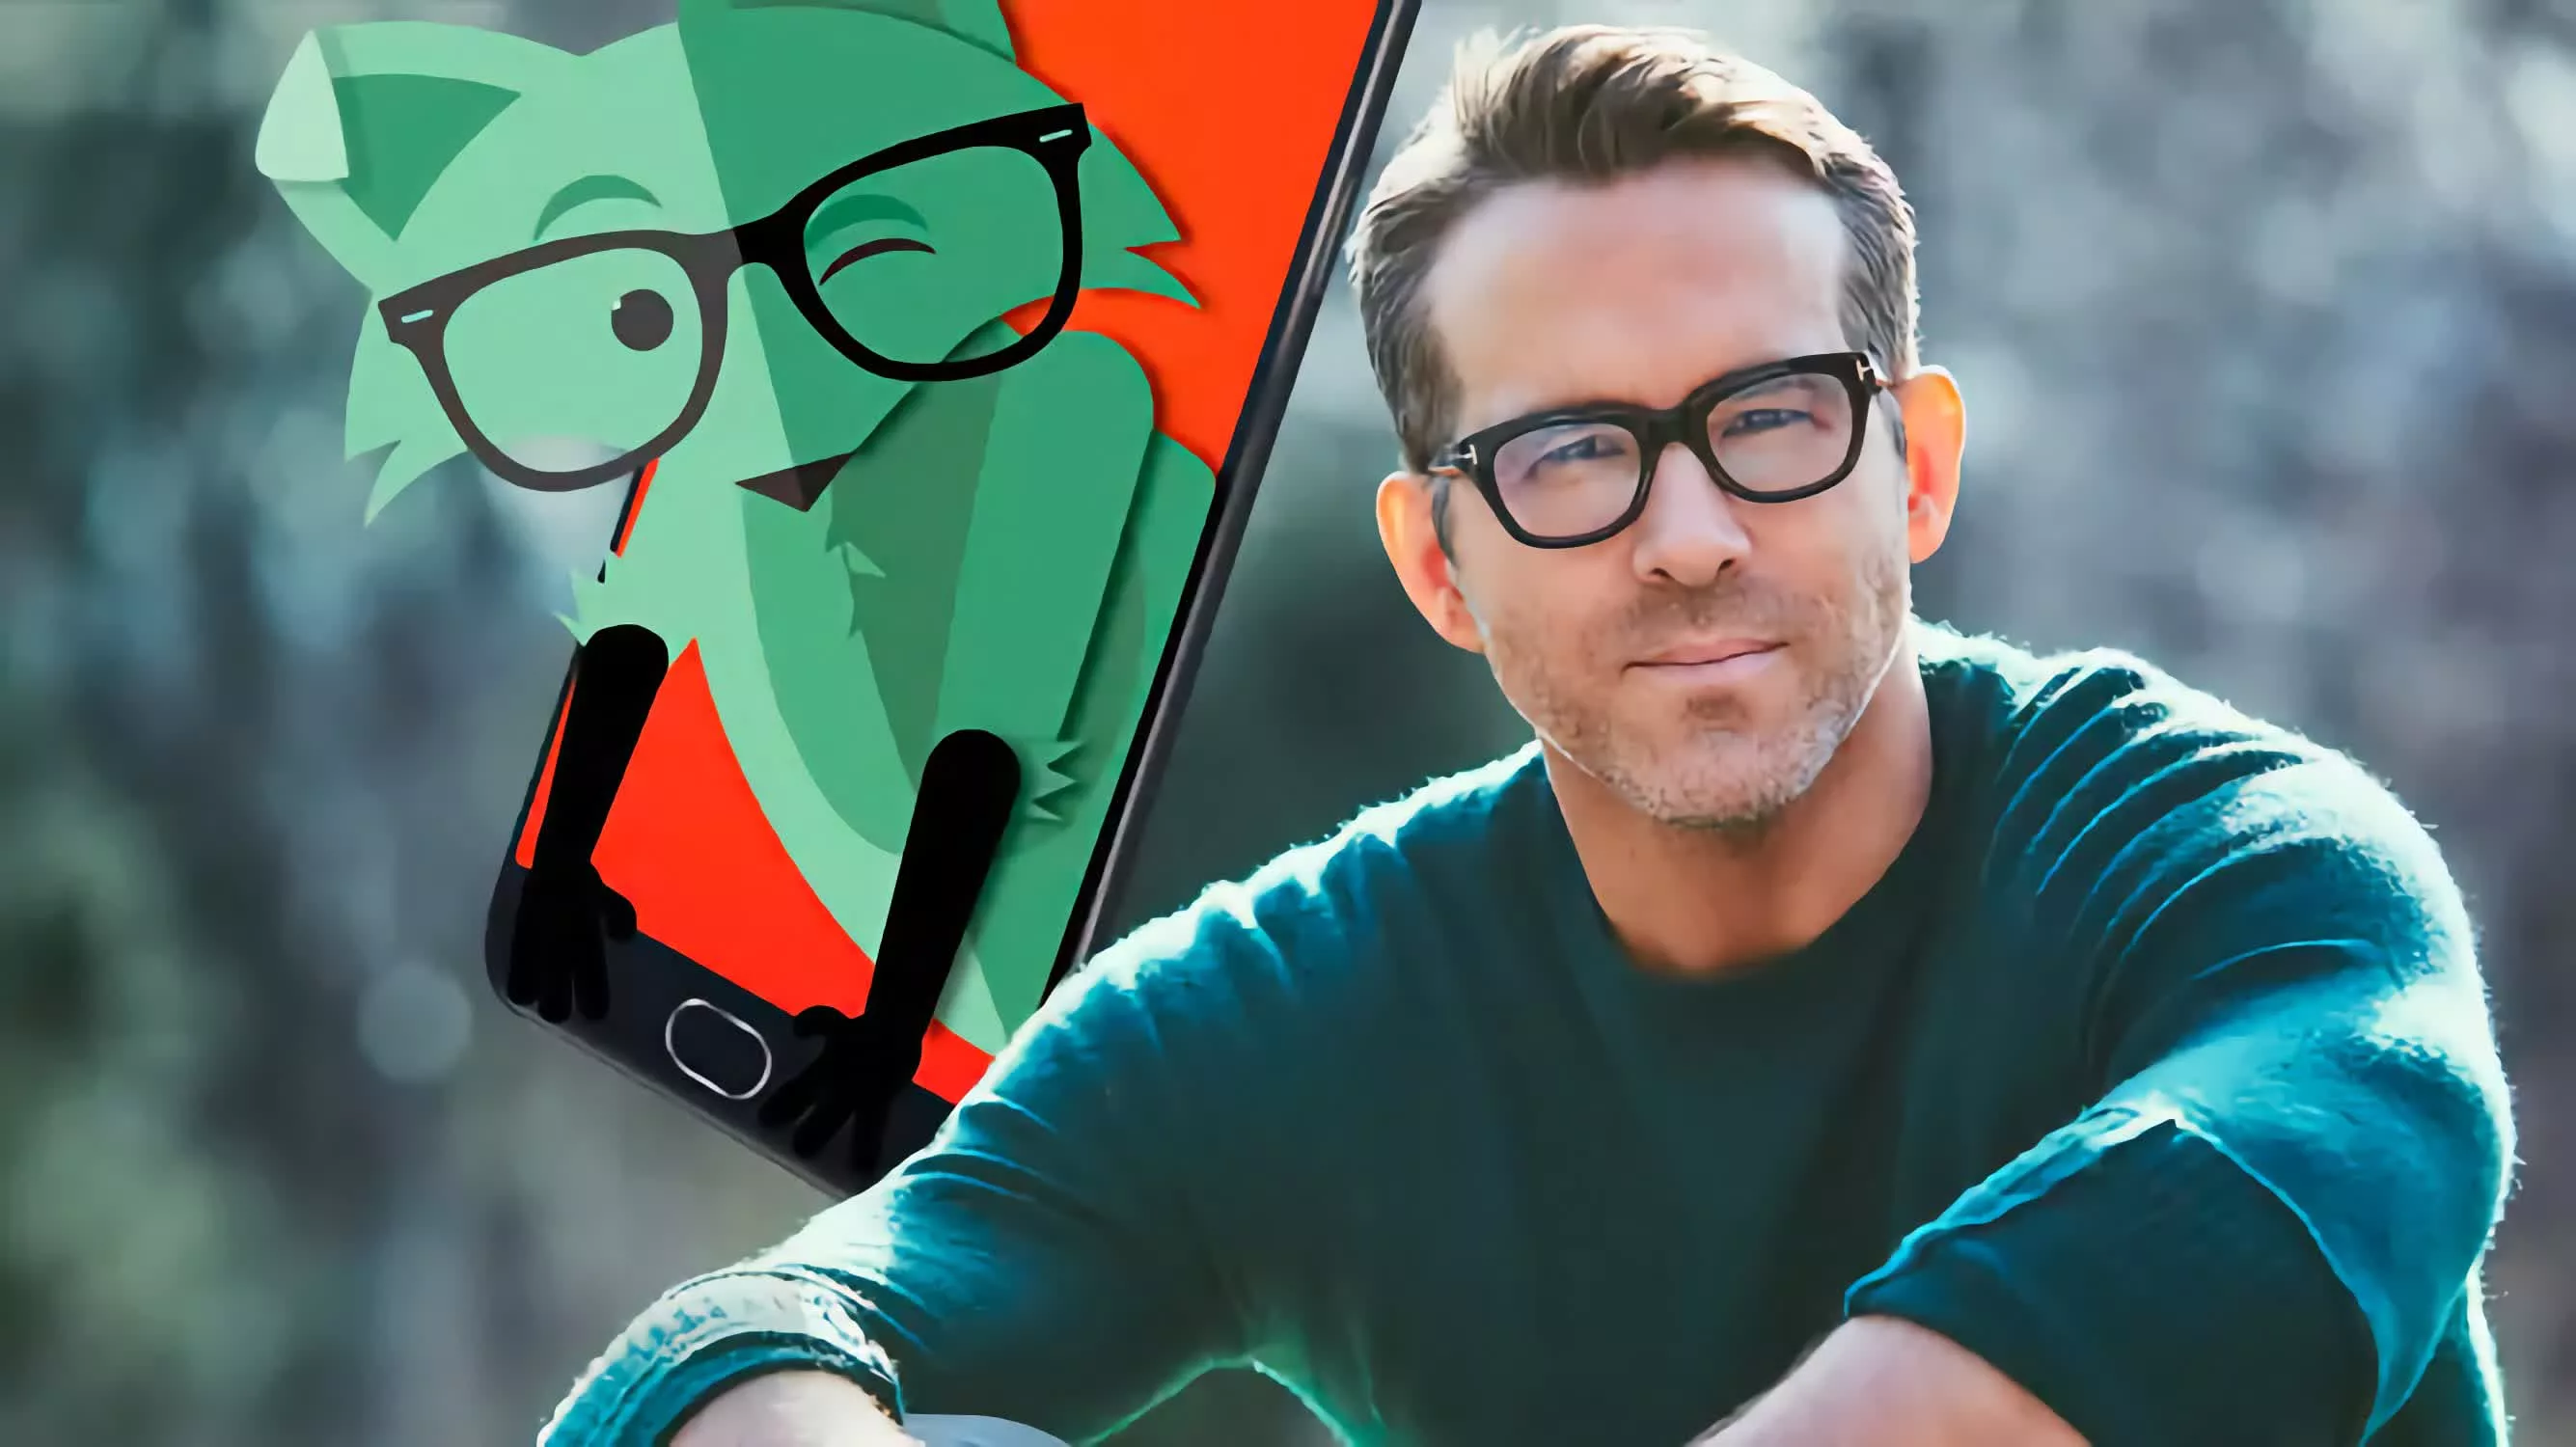 T-Mobile to acquire Ryan Reynolds' Mint Mobile for $1.35 billion